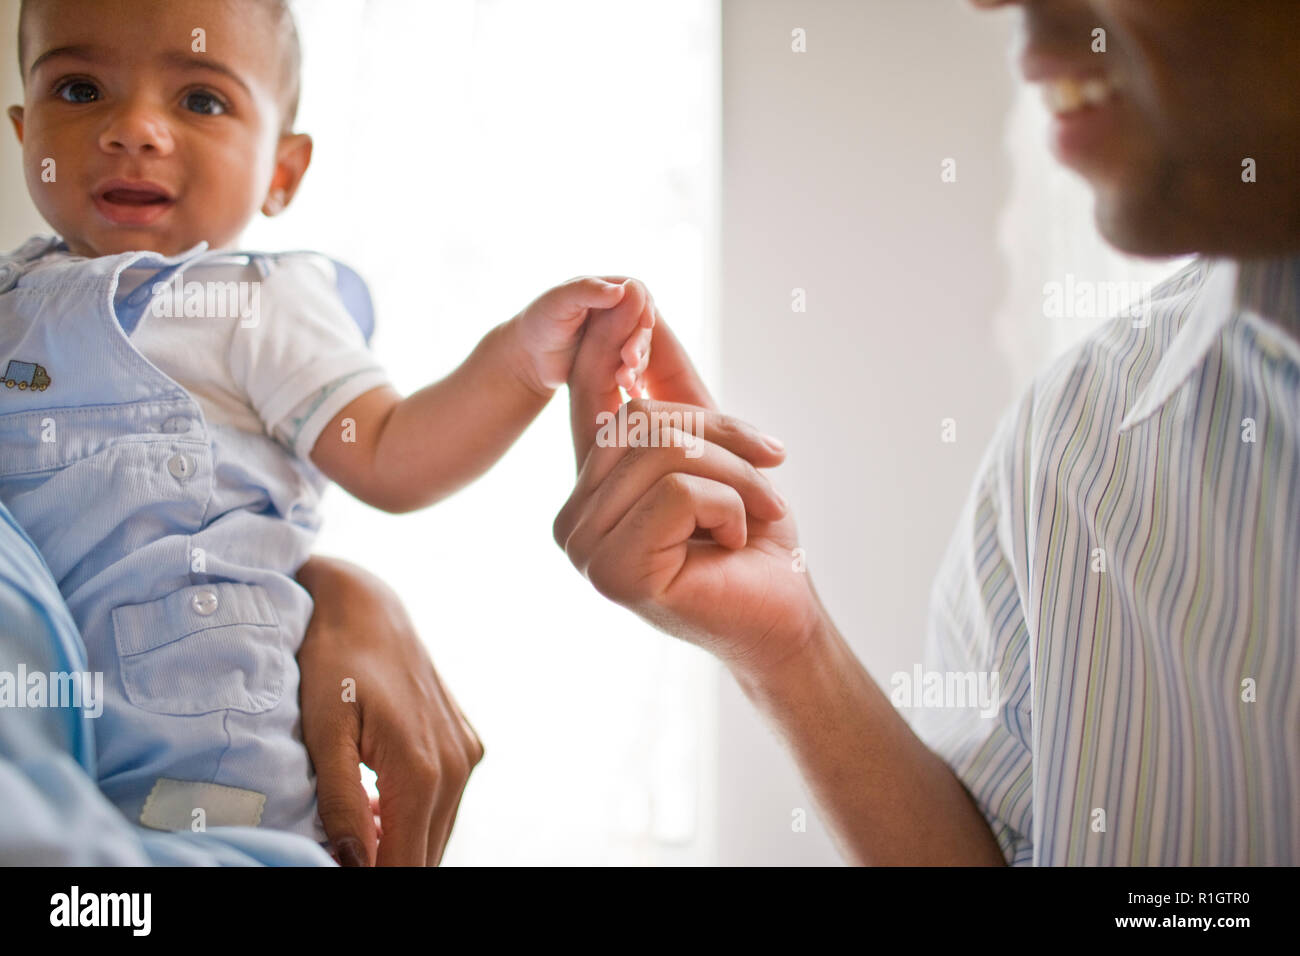 Father holding hands with his young son. Stock Photo